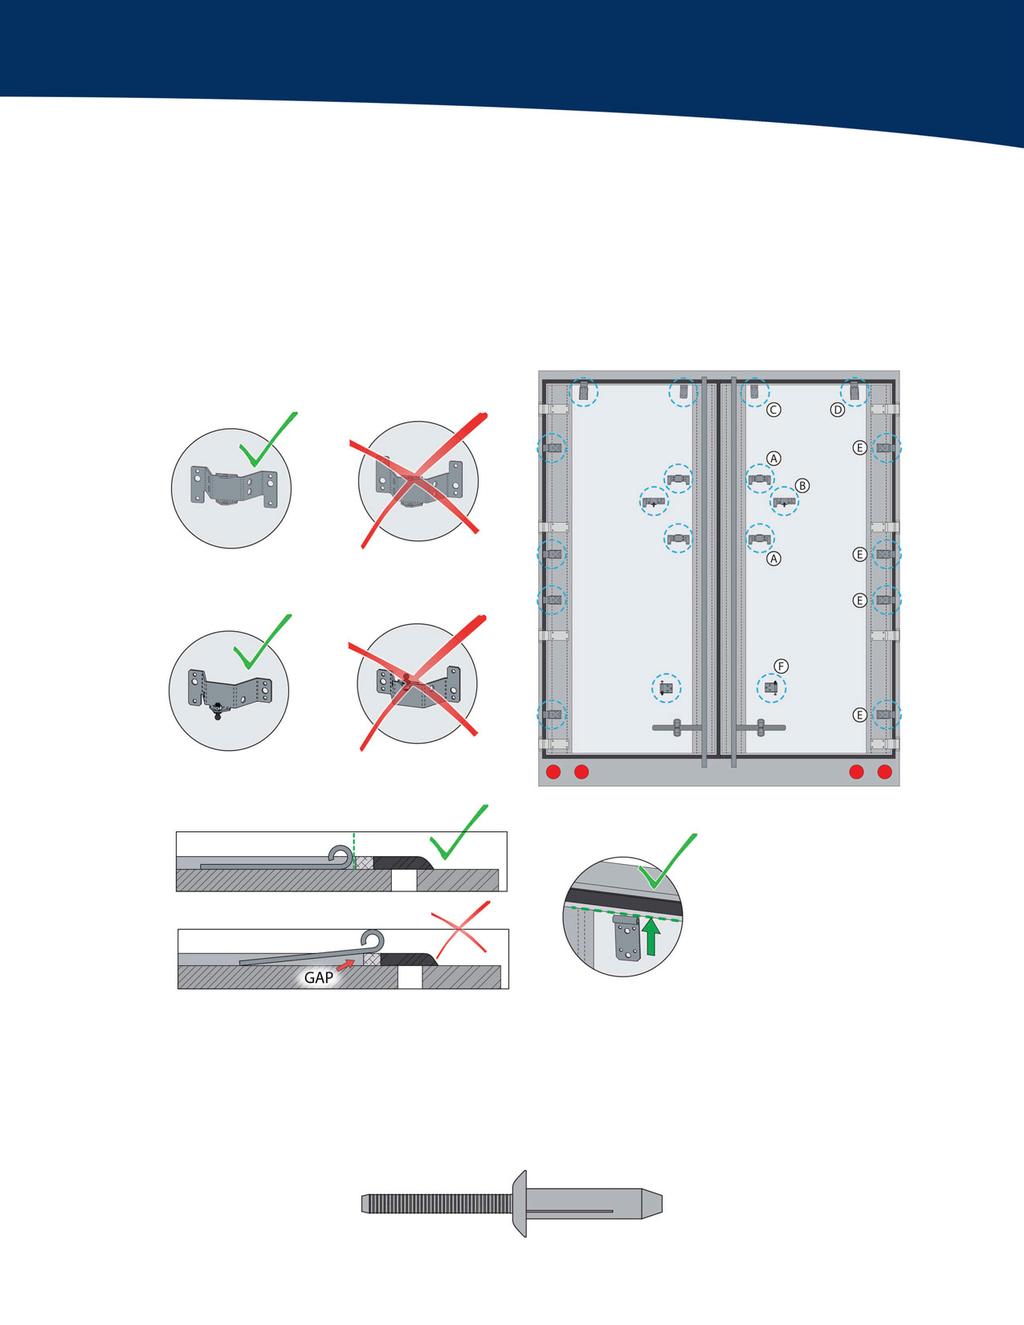 Wabash Refrigerated Trailer Installation Bracket Attachments 1. Remove adhesive backing from metal brackets. 2. Stick metal brackets to door.